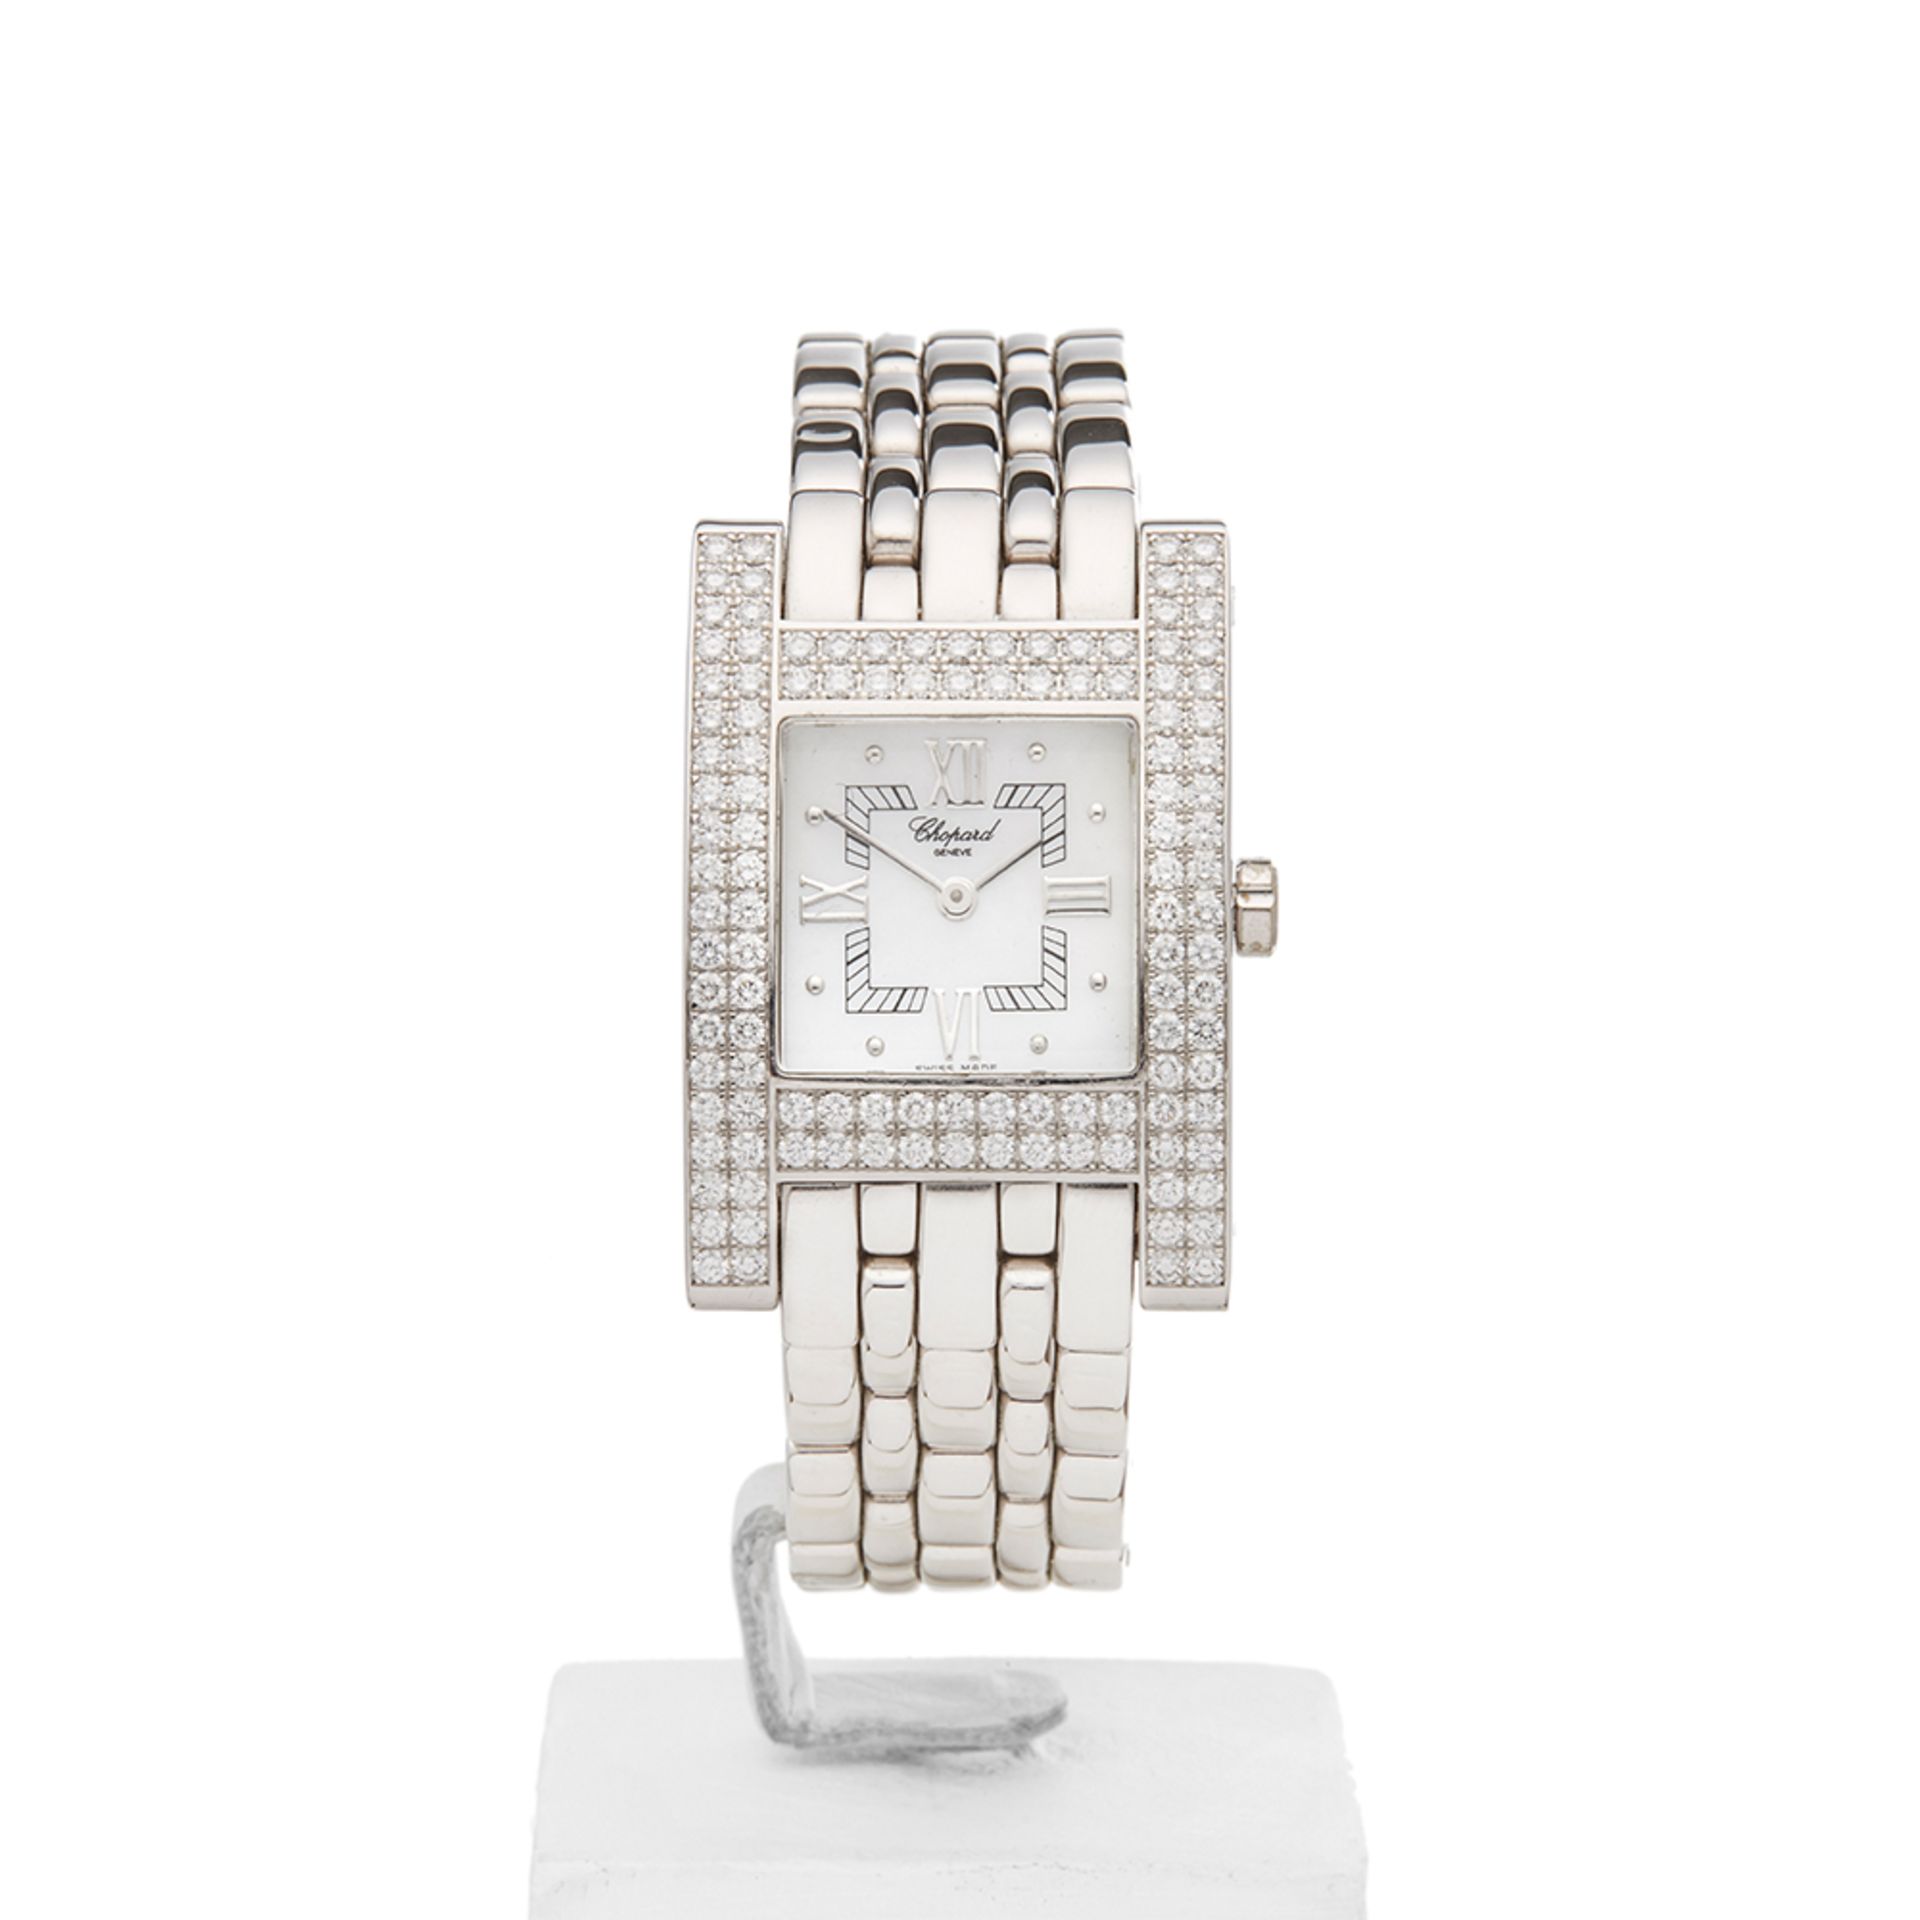 Chopard Your Hour Original Diamond 25mm 18k White Gold - 13/6621 - Image 2 of 9